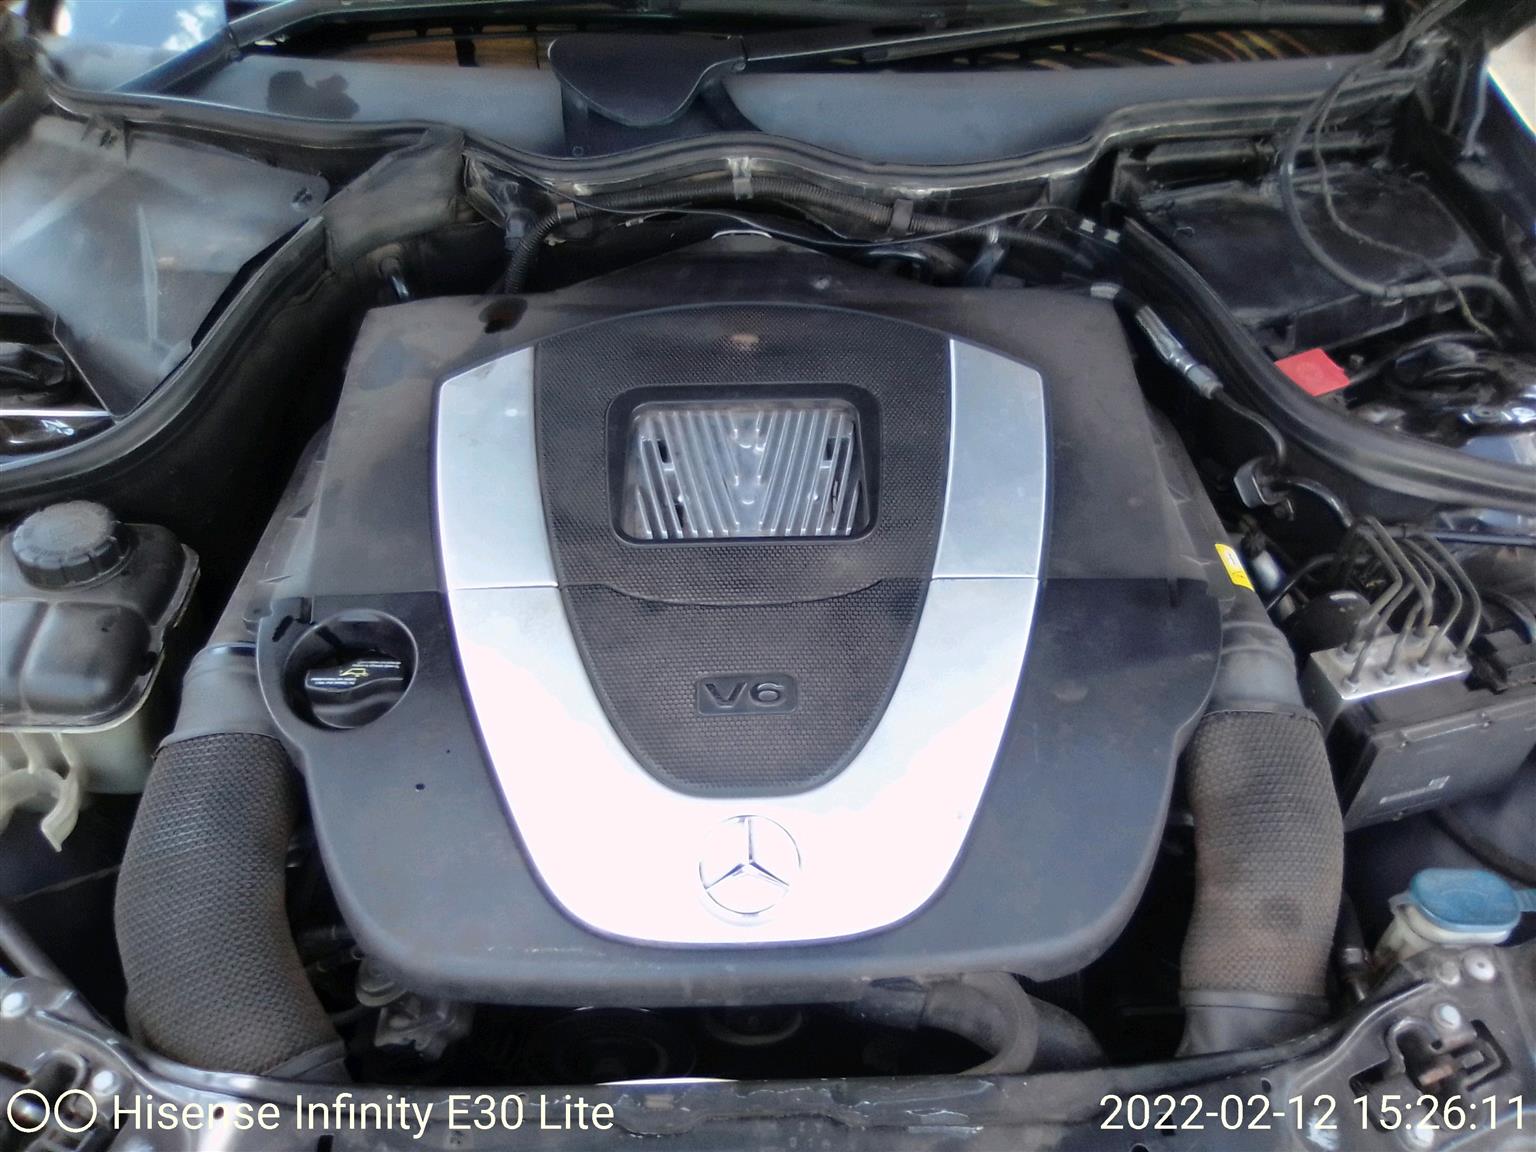 Mercedes Benz C280 v6 nothing to fix I'm very fast and light on feul